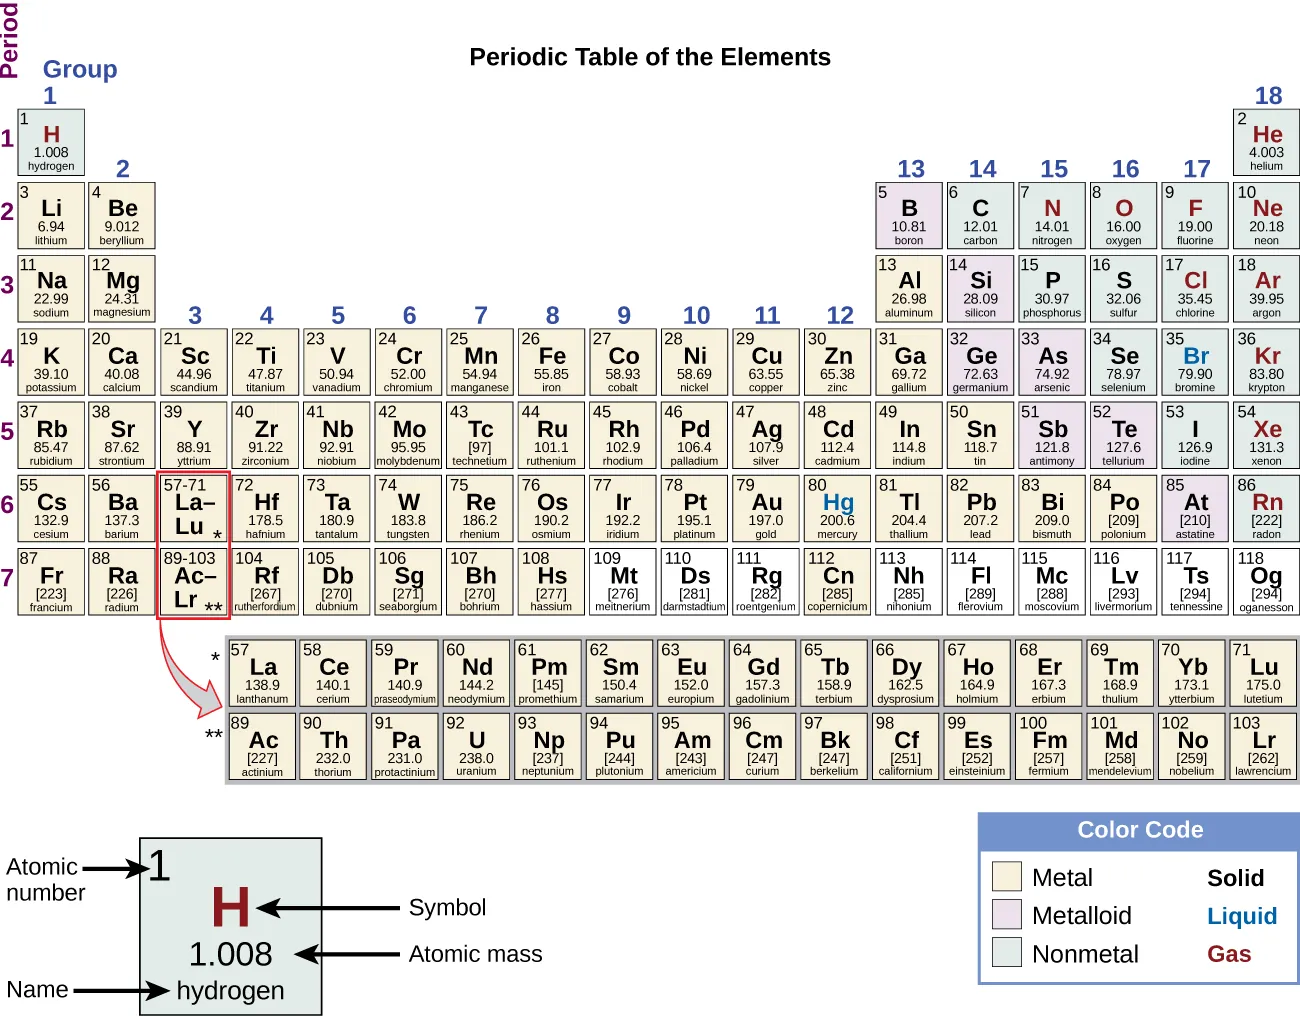 The periodic table consists of eighteen groups and seven periods. Each element has its own square. Within each square is the following information; the atomic number, the symbol, the relative atomic mass, and the name. For example, hydrogen's atomic number is 1, symbol is the letter H; relative atomic mass is 1.01, and name is hydrogen. Two additional rows of elements, known as the lanthanides and actinides, are placed beneath the main table. The lanthanides include elements 57 through 71 and belong in period seven between groups three and four. The actinides include elements 89 through 98 and belong in period eight between the same groups. These elements are placed separately to make the table more compact. For each element, the name, atomic symbol, atomic number, and atomic mass are provided. The atomic number is a whole number that represents the number of protons. The atomic mass, which is the average mass of different isotopes, is estimated to two decimal places. The elements are divided into three categories: metals, nonmetals and metalloids. These form a diagonal line from period two, group thirteen to period seven, group sixteen. All elements to the left of the metalloids are metals, and all elements to the right are nonmetals.